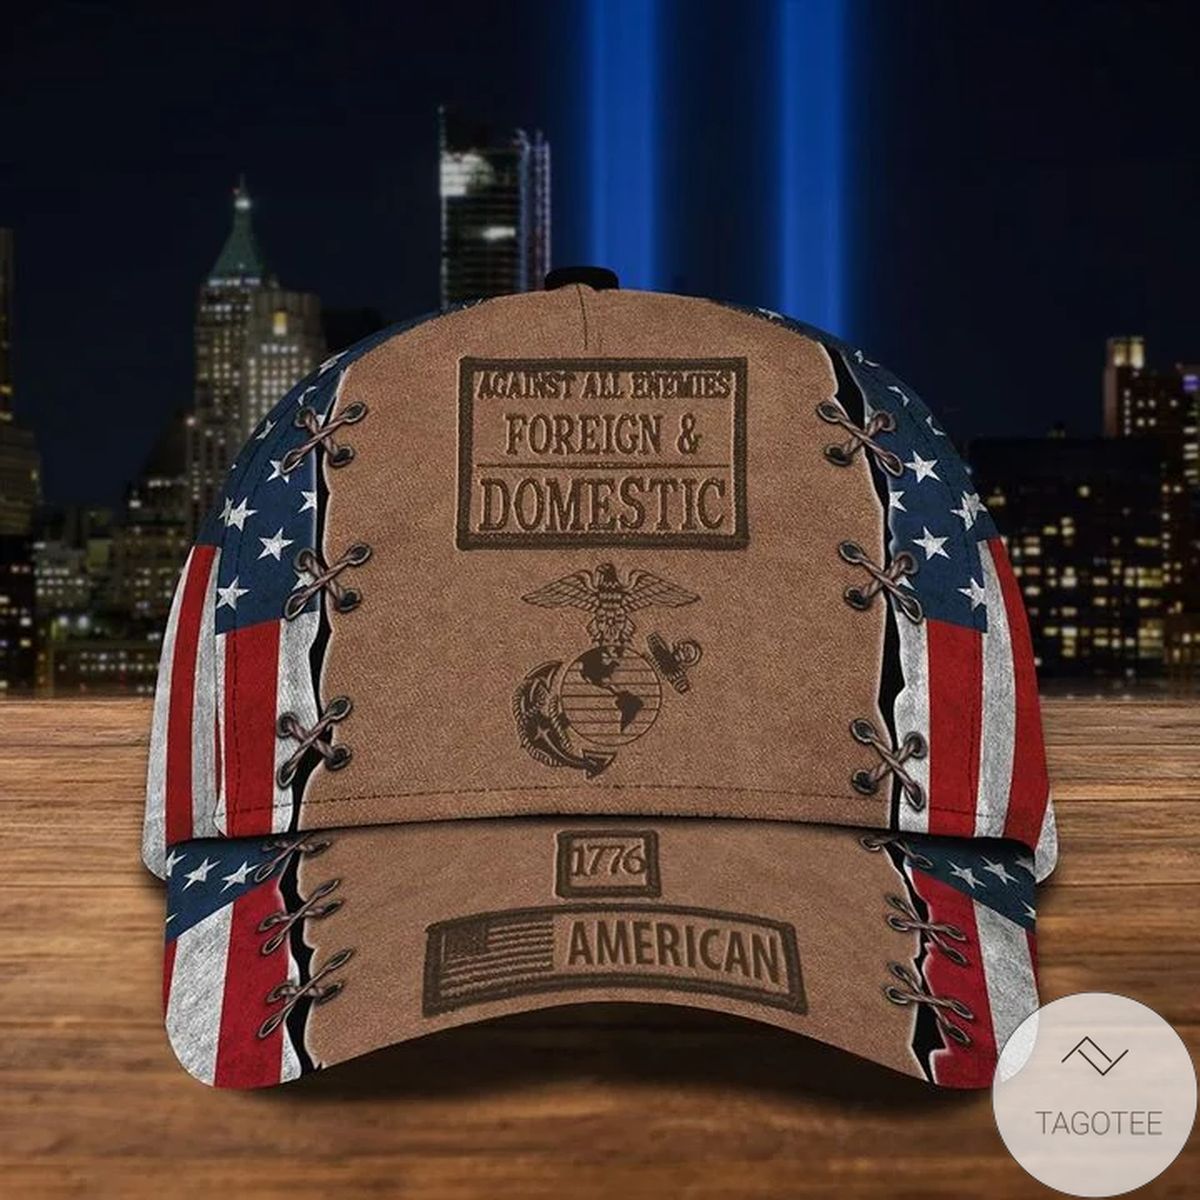 Marine Corps Hat 1776 American Against All Enemies Foreign & Domestic Unique Gift For Veterans